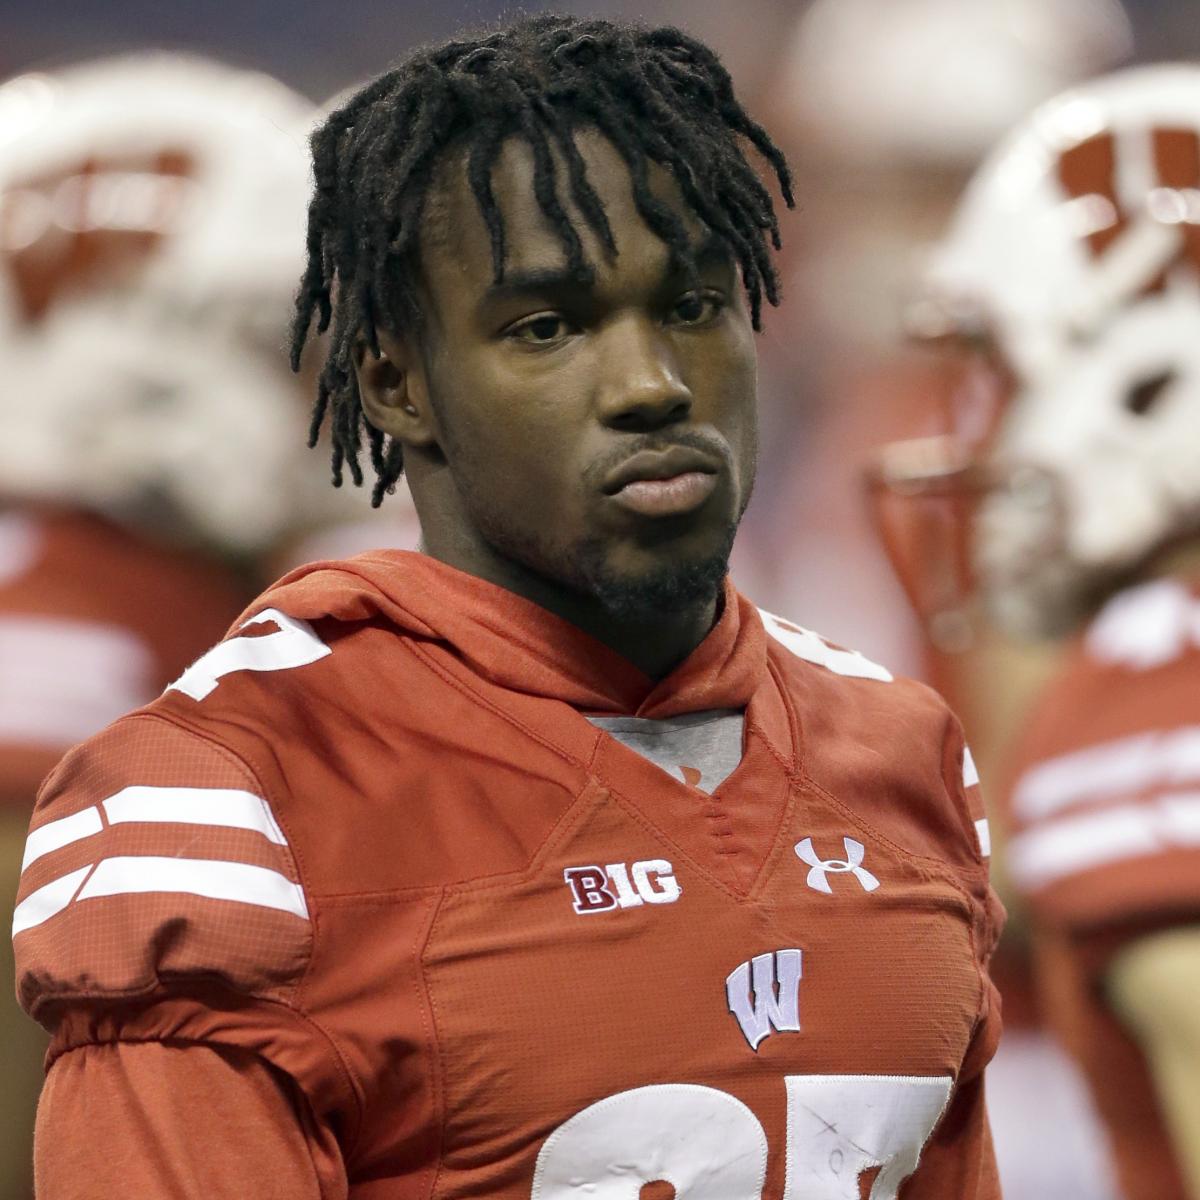 Quintez Cephus Denies Alleged Unlawful Conduct, Takes Leave from Wisconsin.